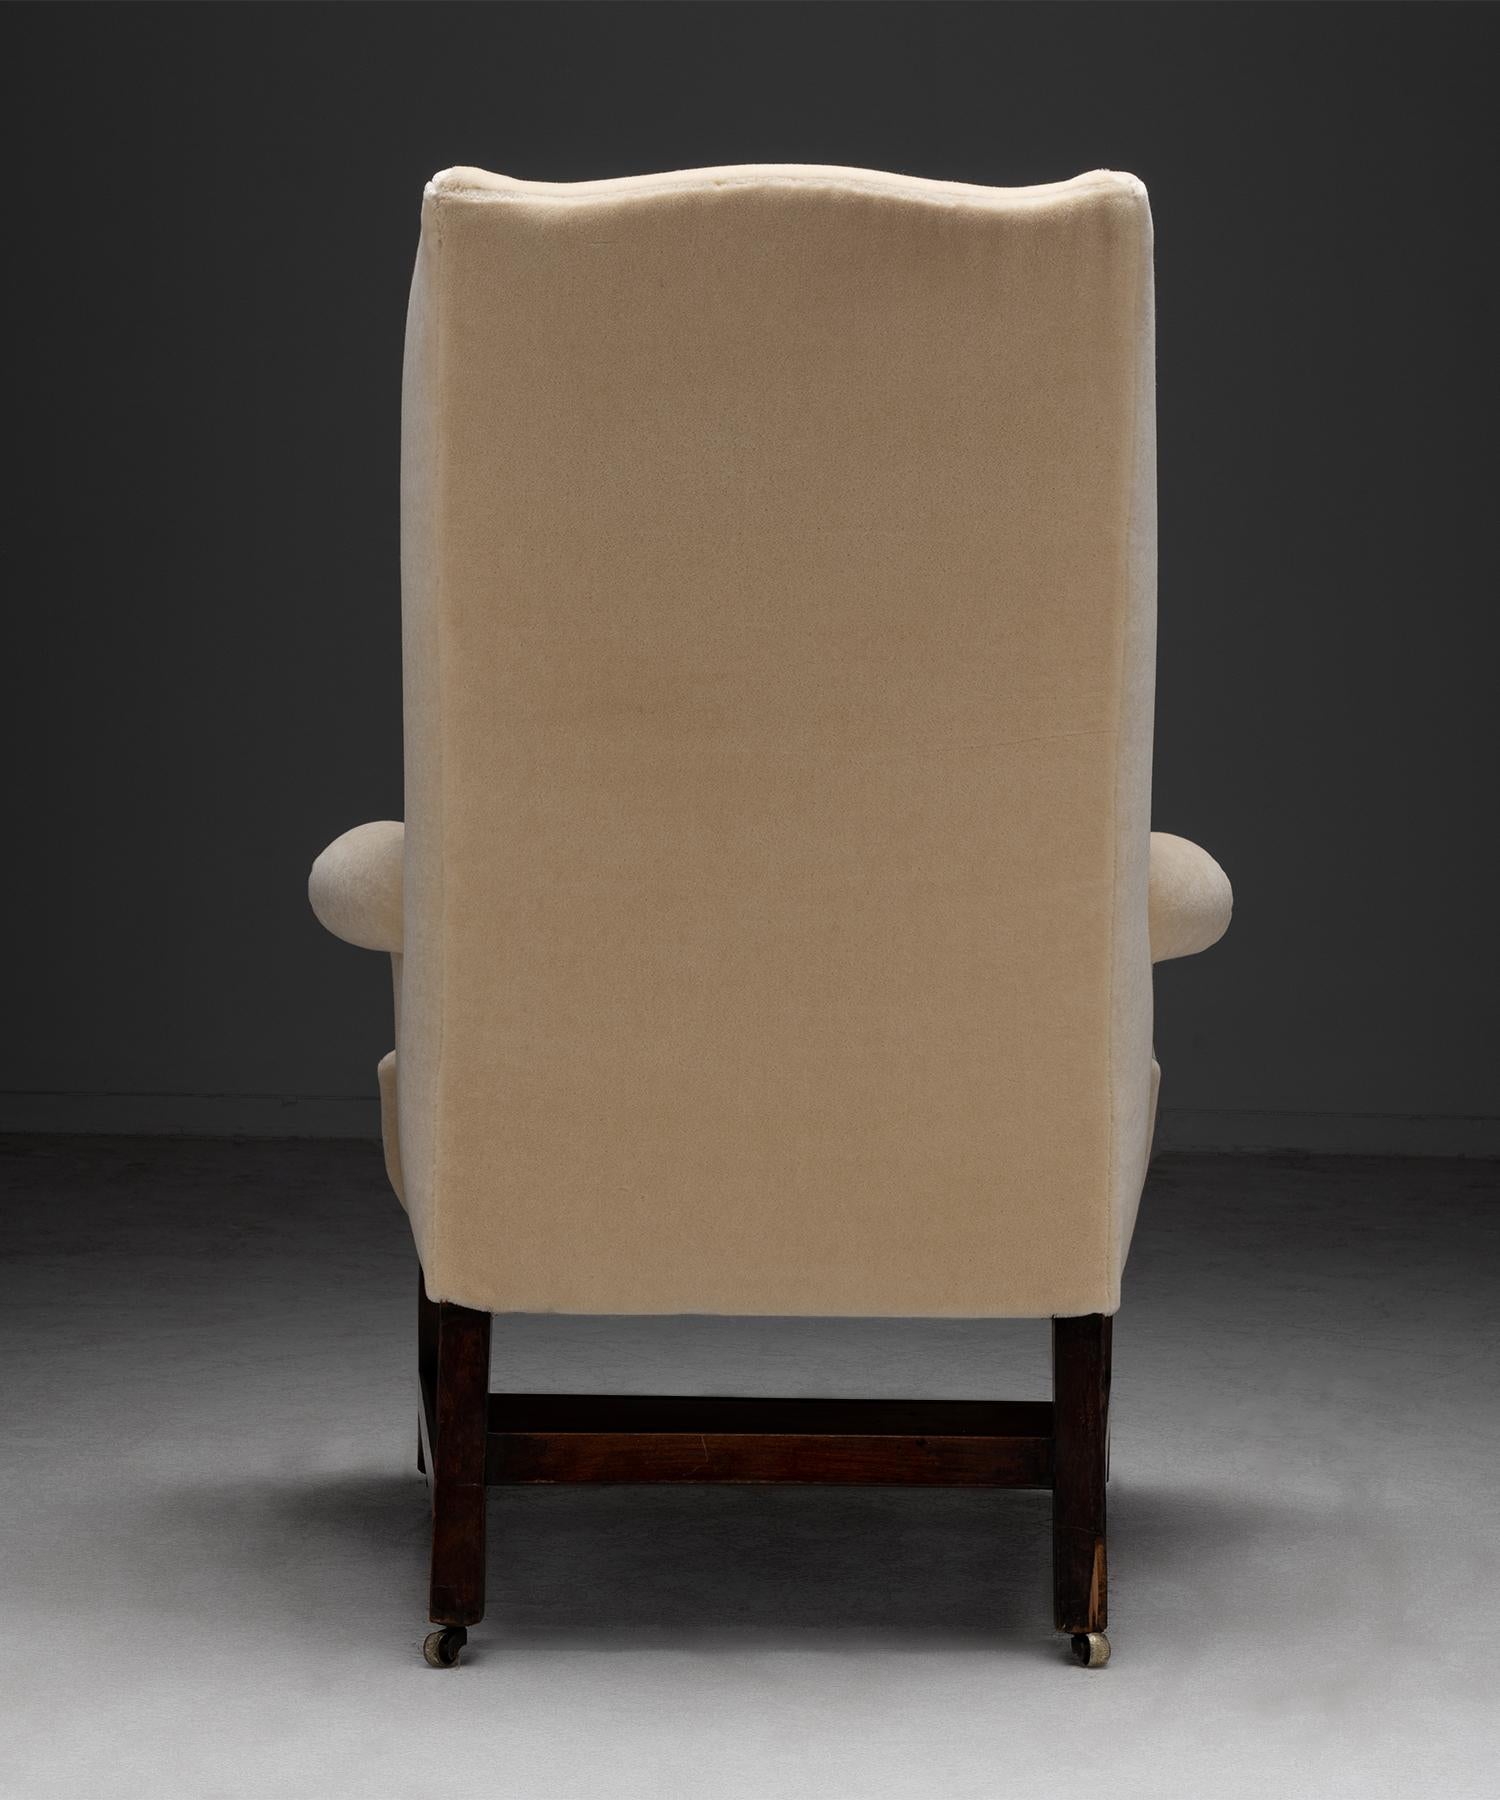 English George III Mahogany Wing Chair in Teddy Mohair from Pierre Frey